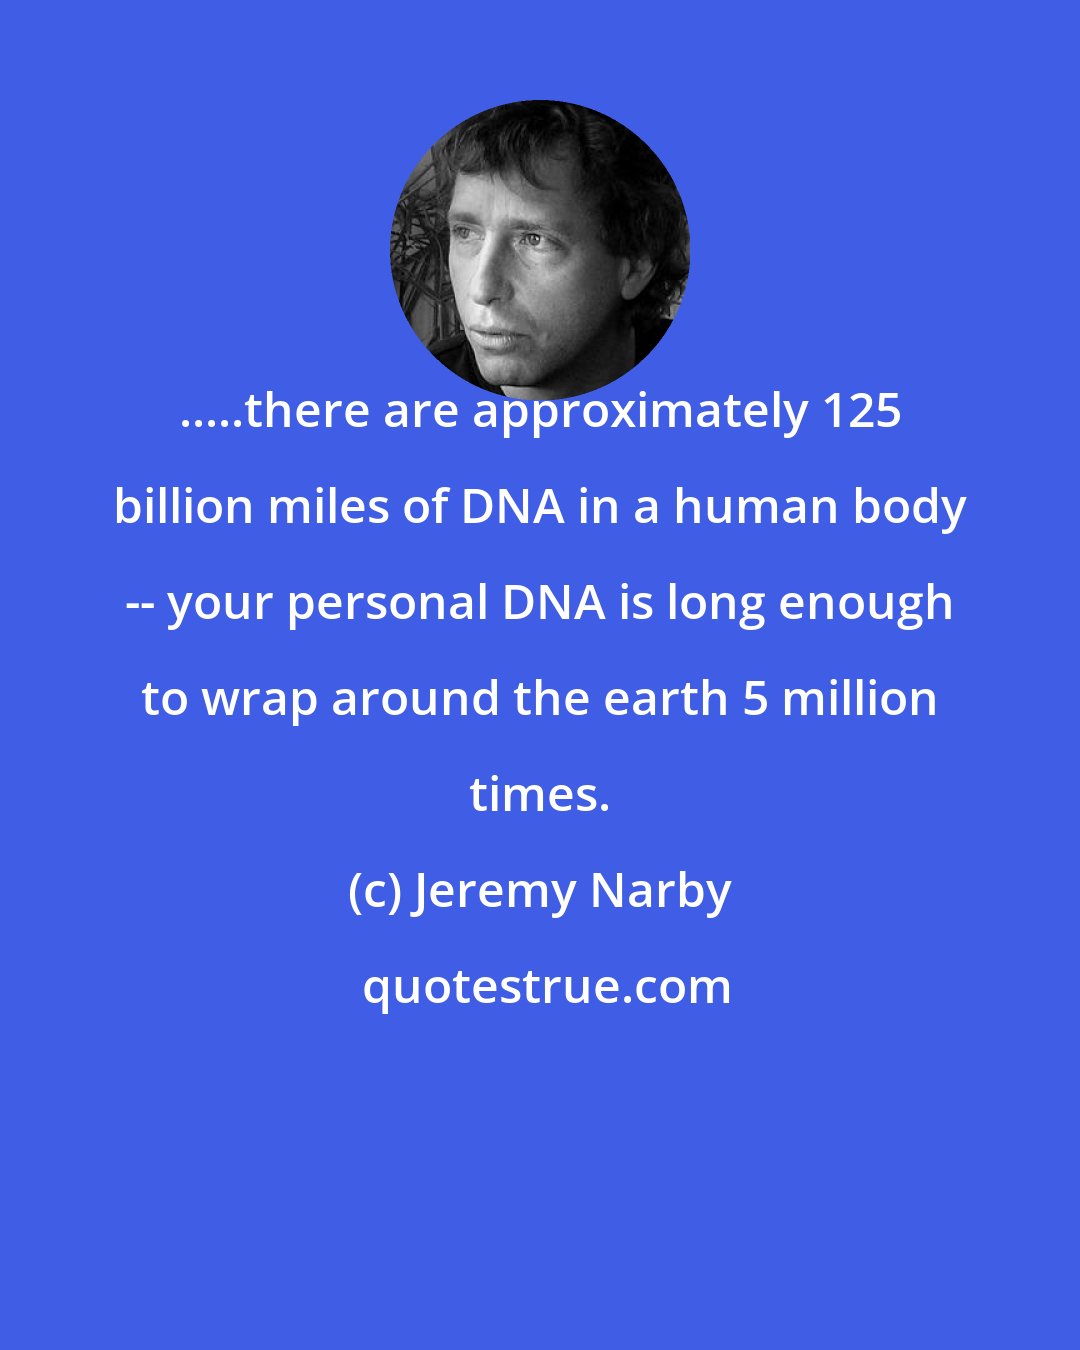 Jeremy Narby: .....there are approximately 125 billion miles of DNA in a human body -- your personal DNA is long enough to wrap around the earth 5 million times.